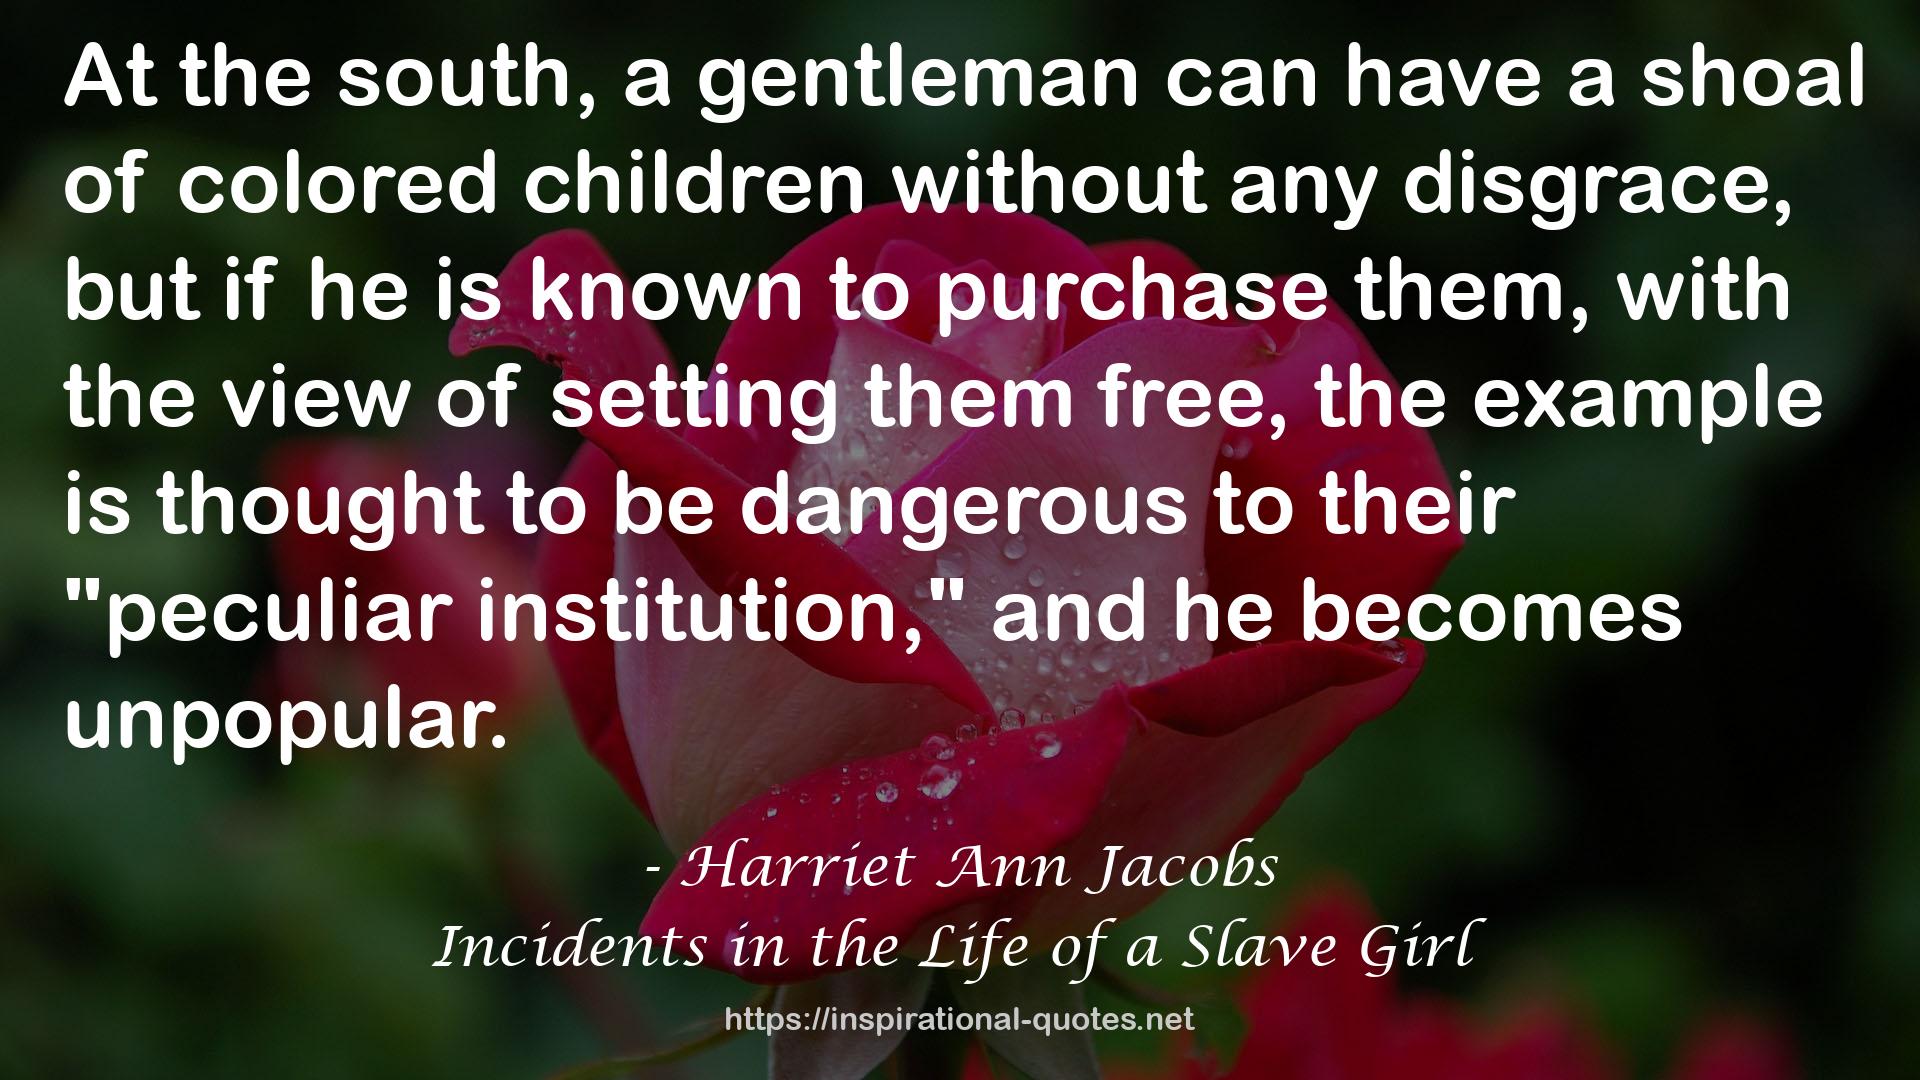 Incidents in the Life of a Slave Girl QUOTES